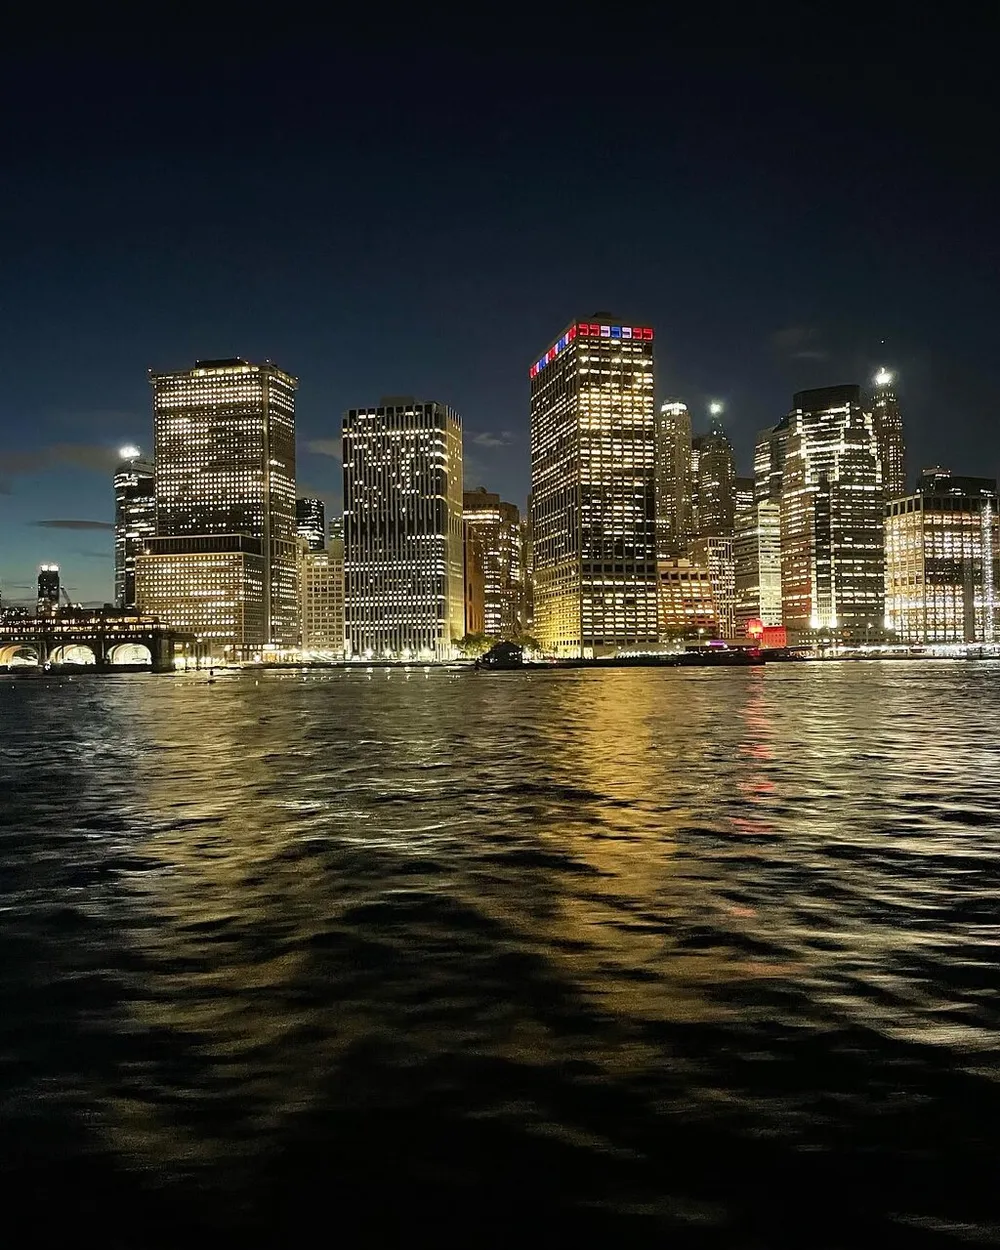 The image captures a glittering skyline of skyscrapers at night reflected in the rippling waters of a large body of water